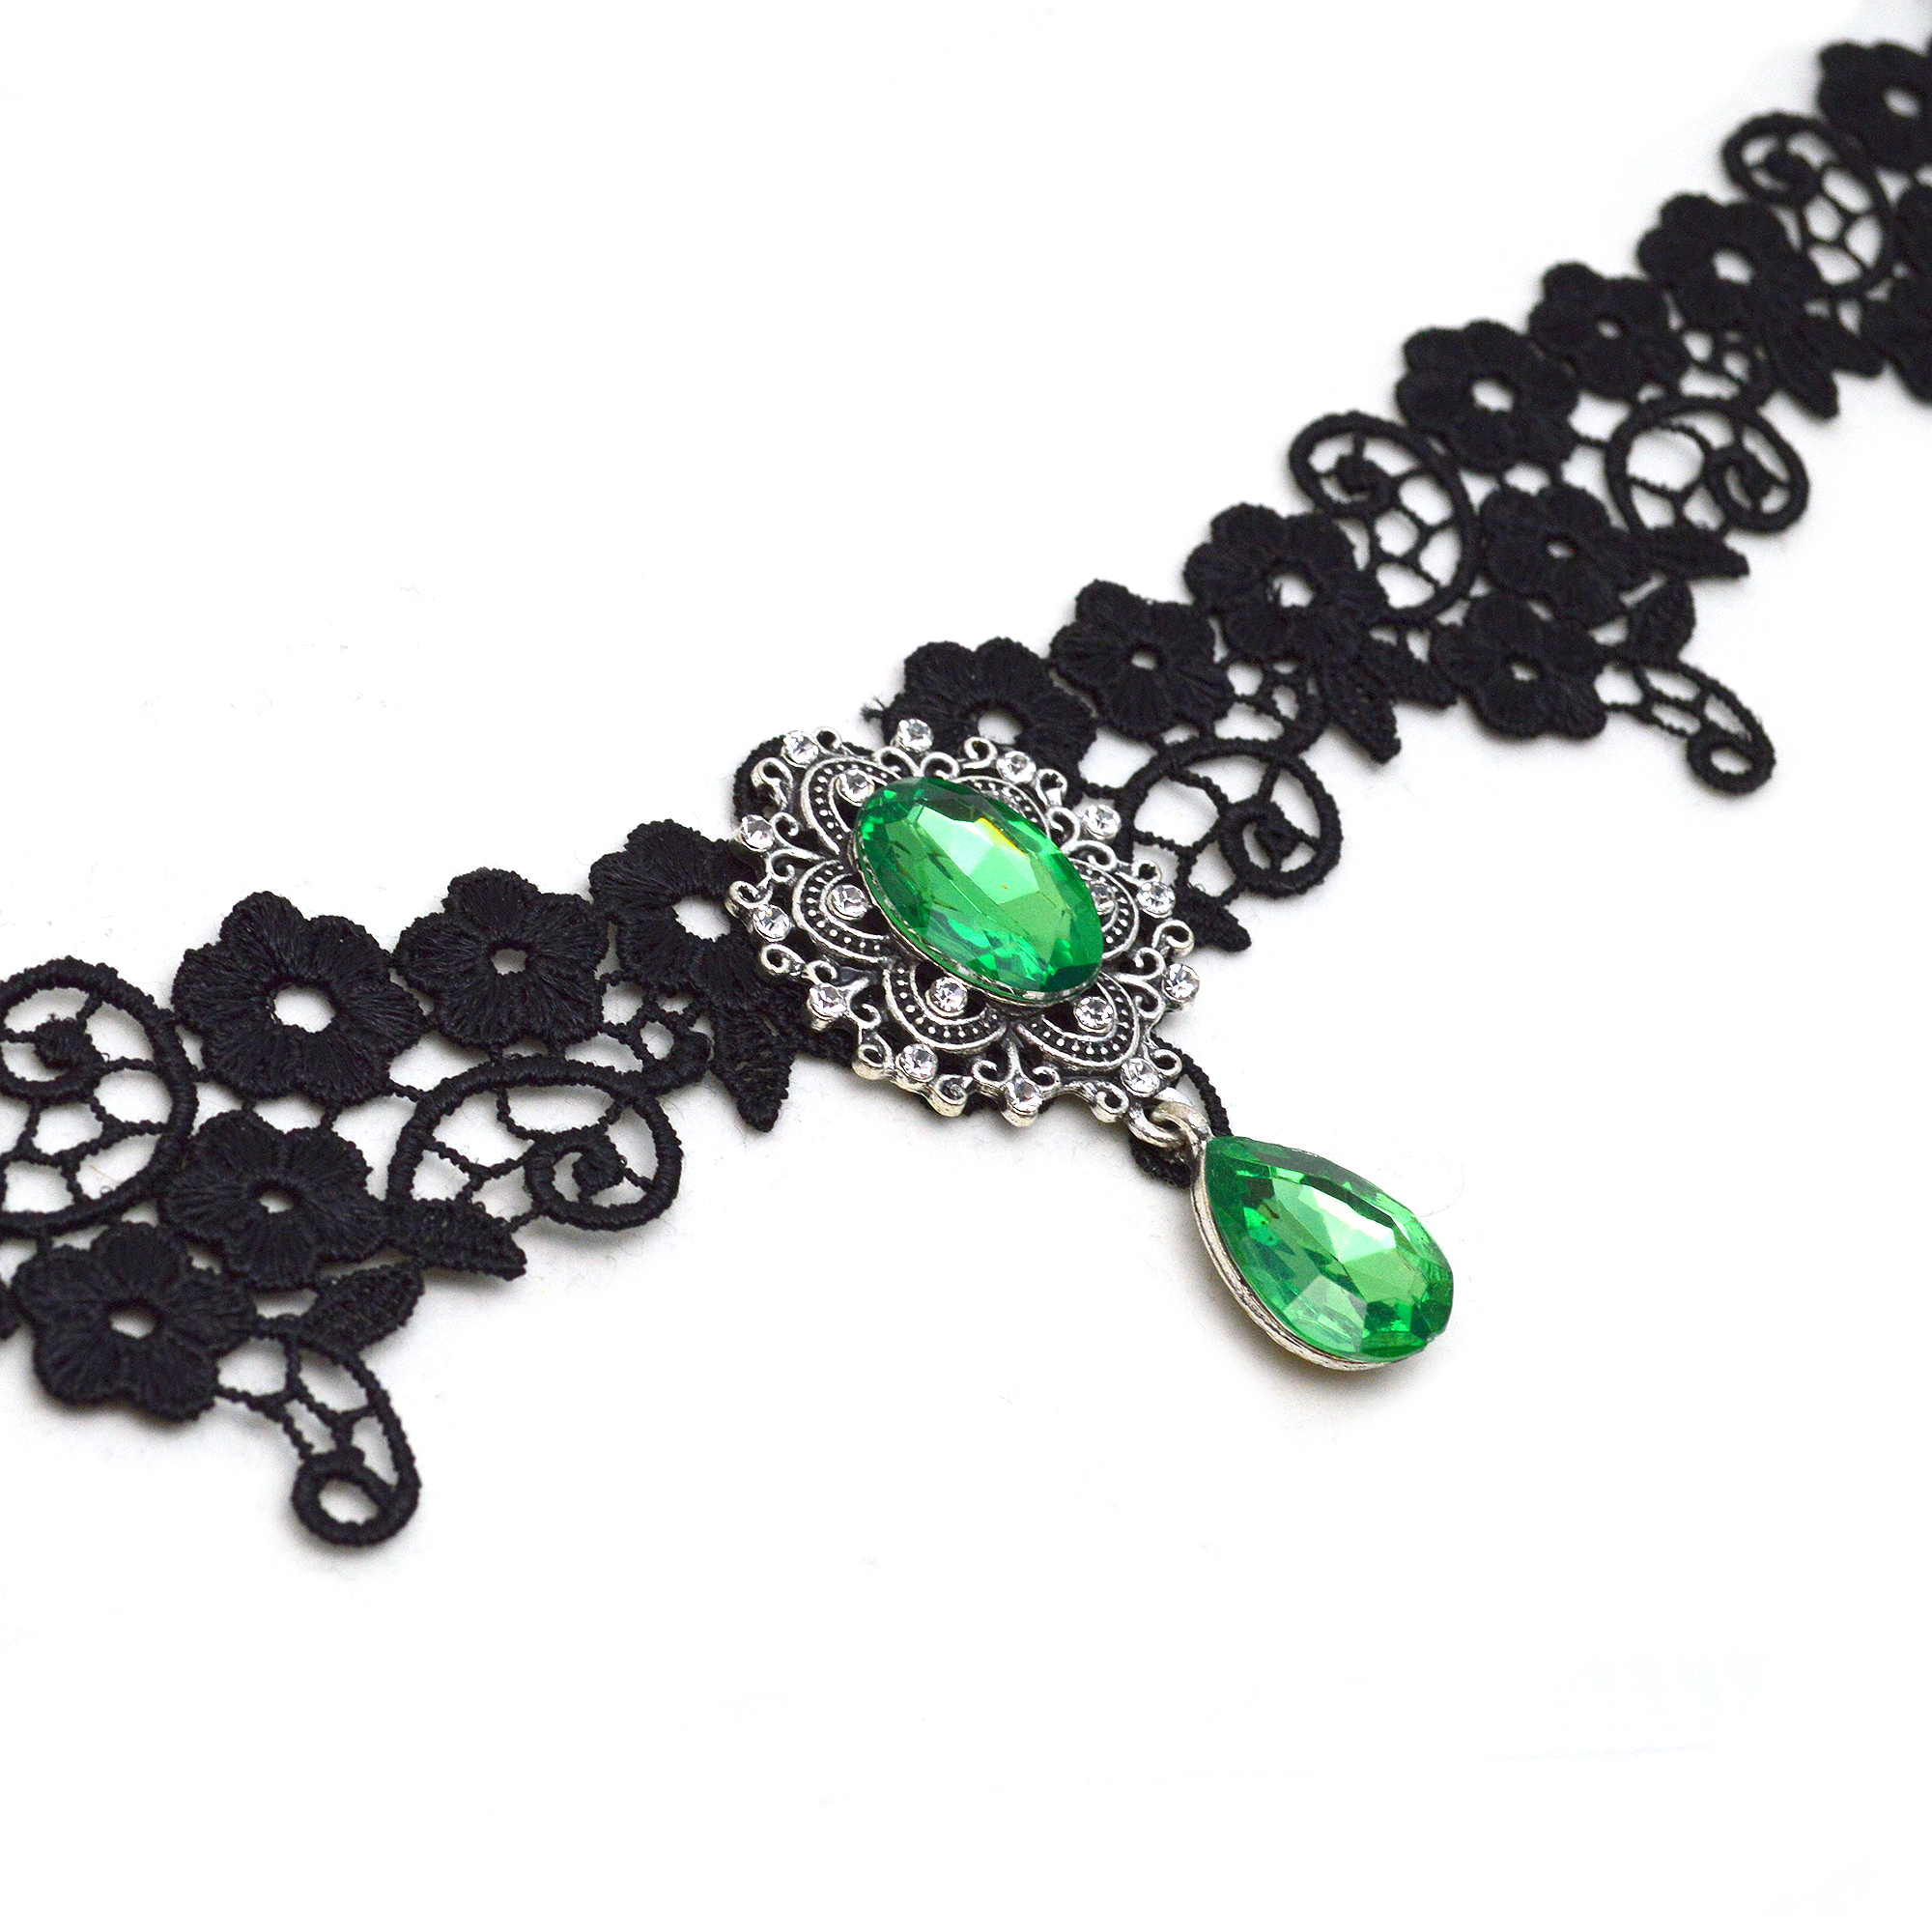 Gothic Green Emerald Victorian Lace Choker